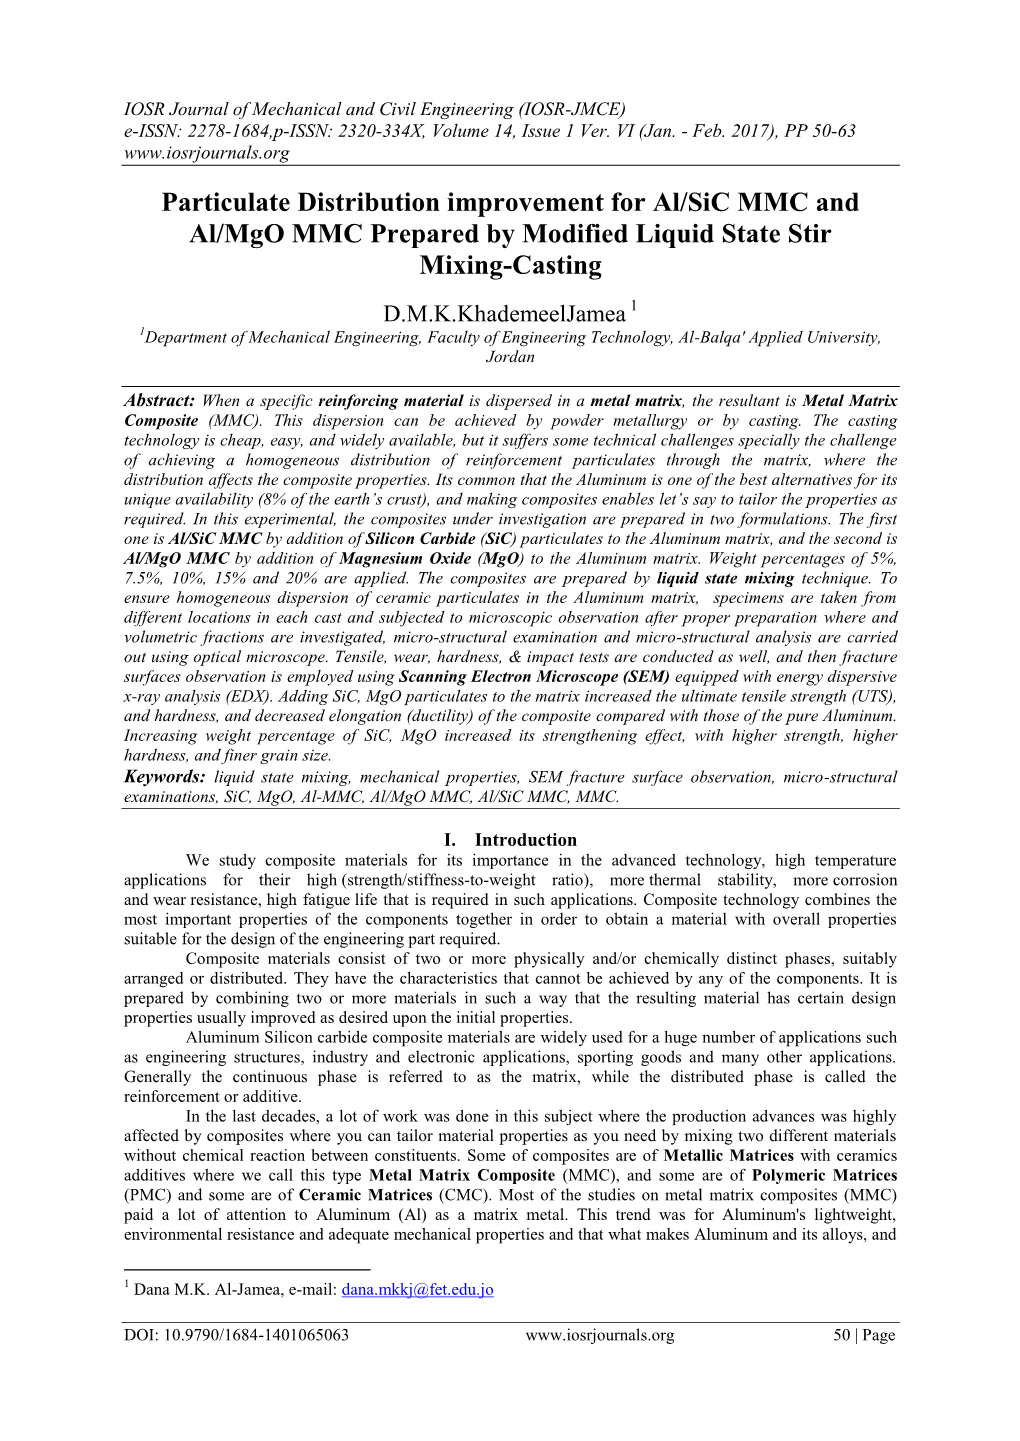 Particulate Distribution Improvement for Al/Sic MMC and Al/Mgo MMC Prepared by Modified Liquid State Stir Mixing-Casting